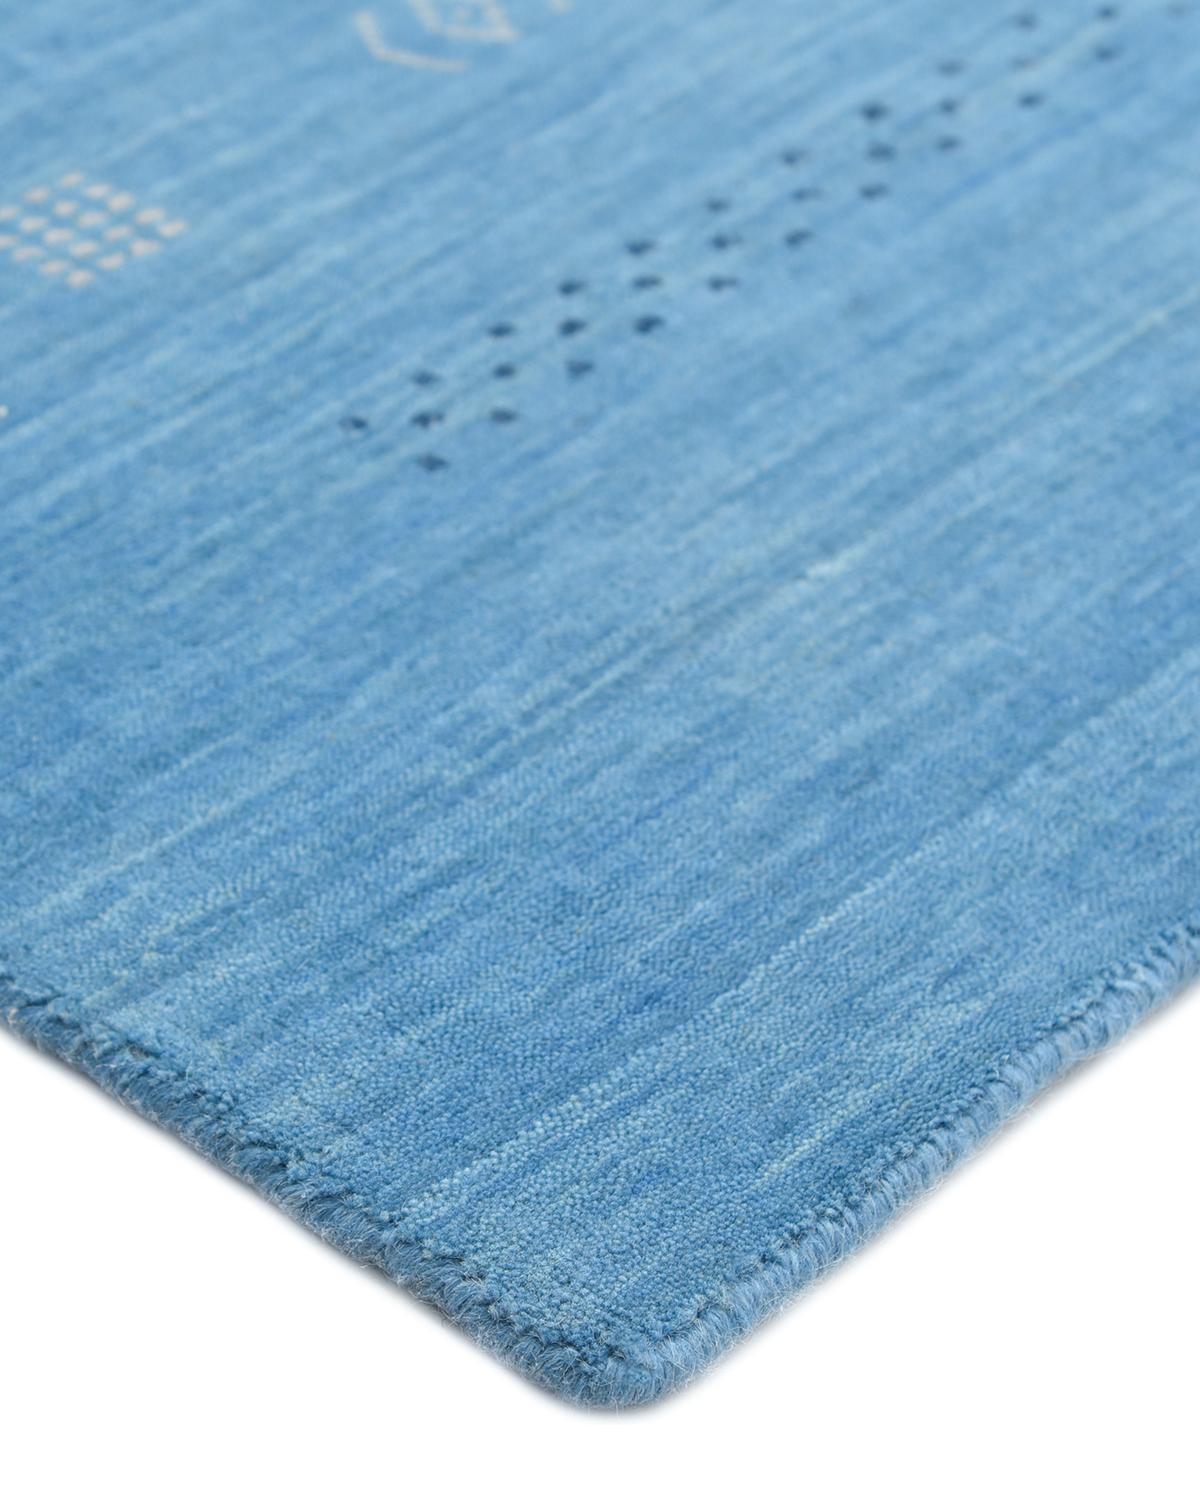 Color: Sapphire. Made in: India. 80% wool, 20% cotton. The nomads of Iran’s Zagros Mountains wove the original Gabbeh rugs in part to keep themselves warm on cold winter nights. In tribute to those original designs, this collection boasts a